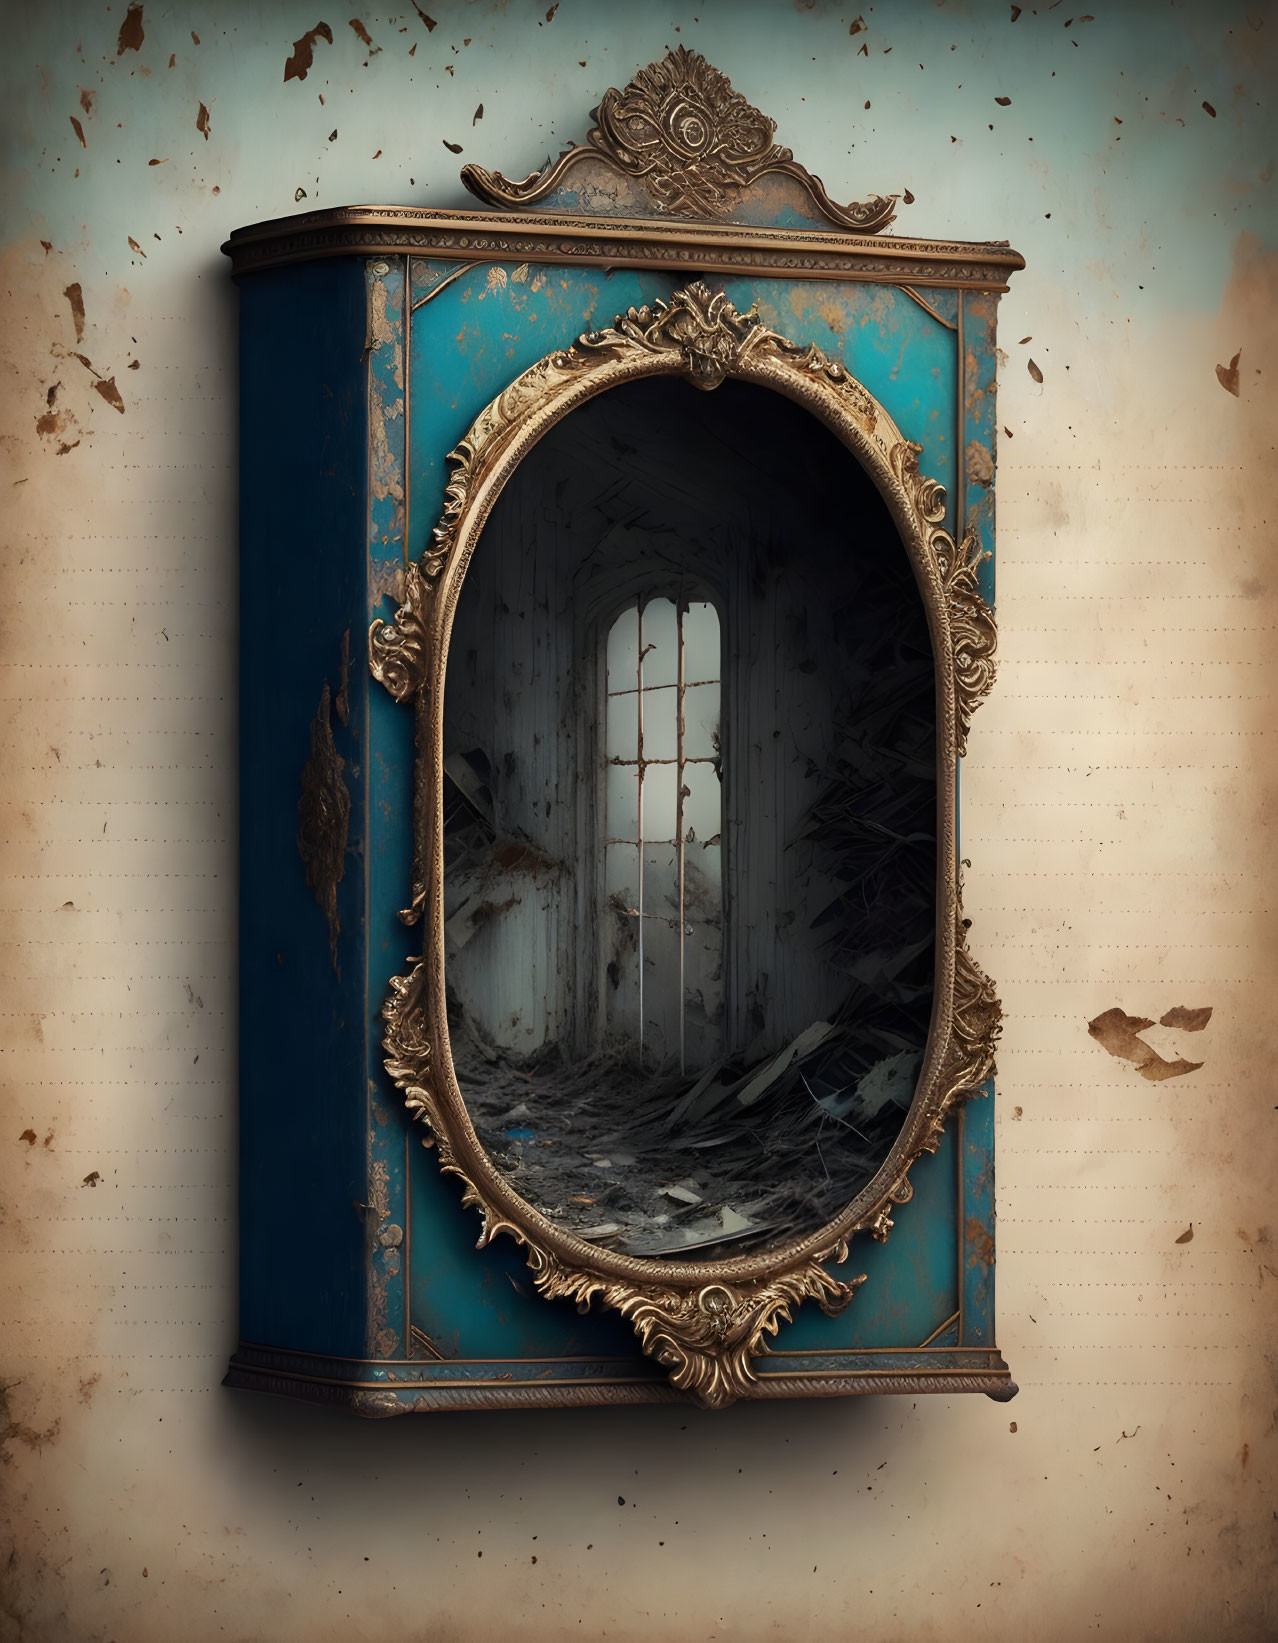 Vintage Blue Framed Mirror Reflects Abandoned Interior with Barred Window